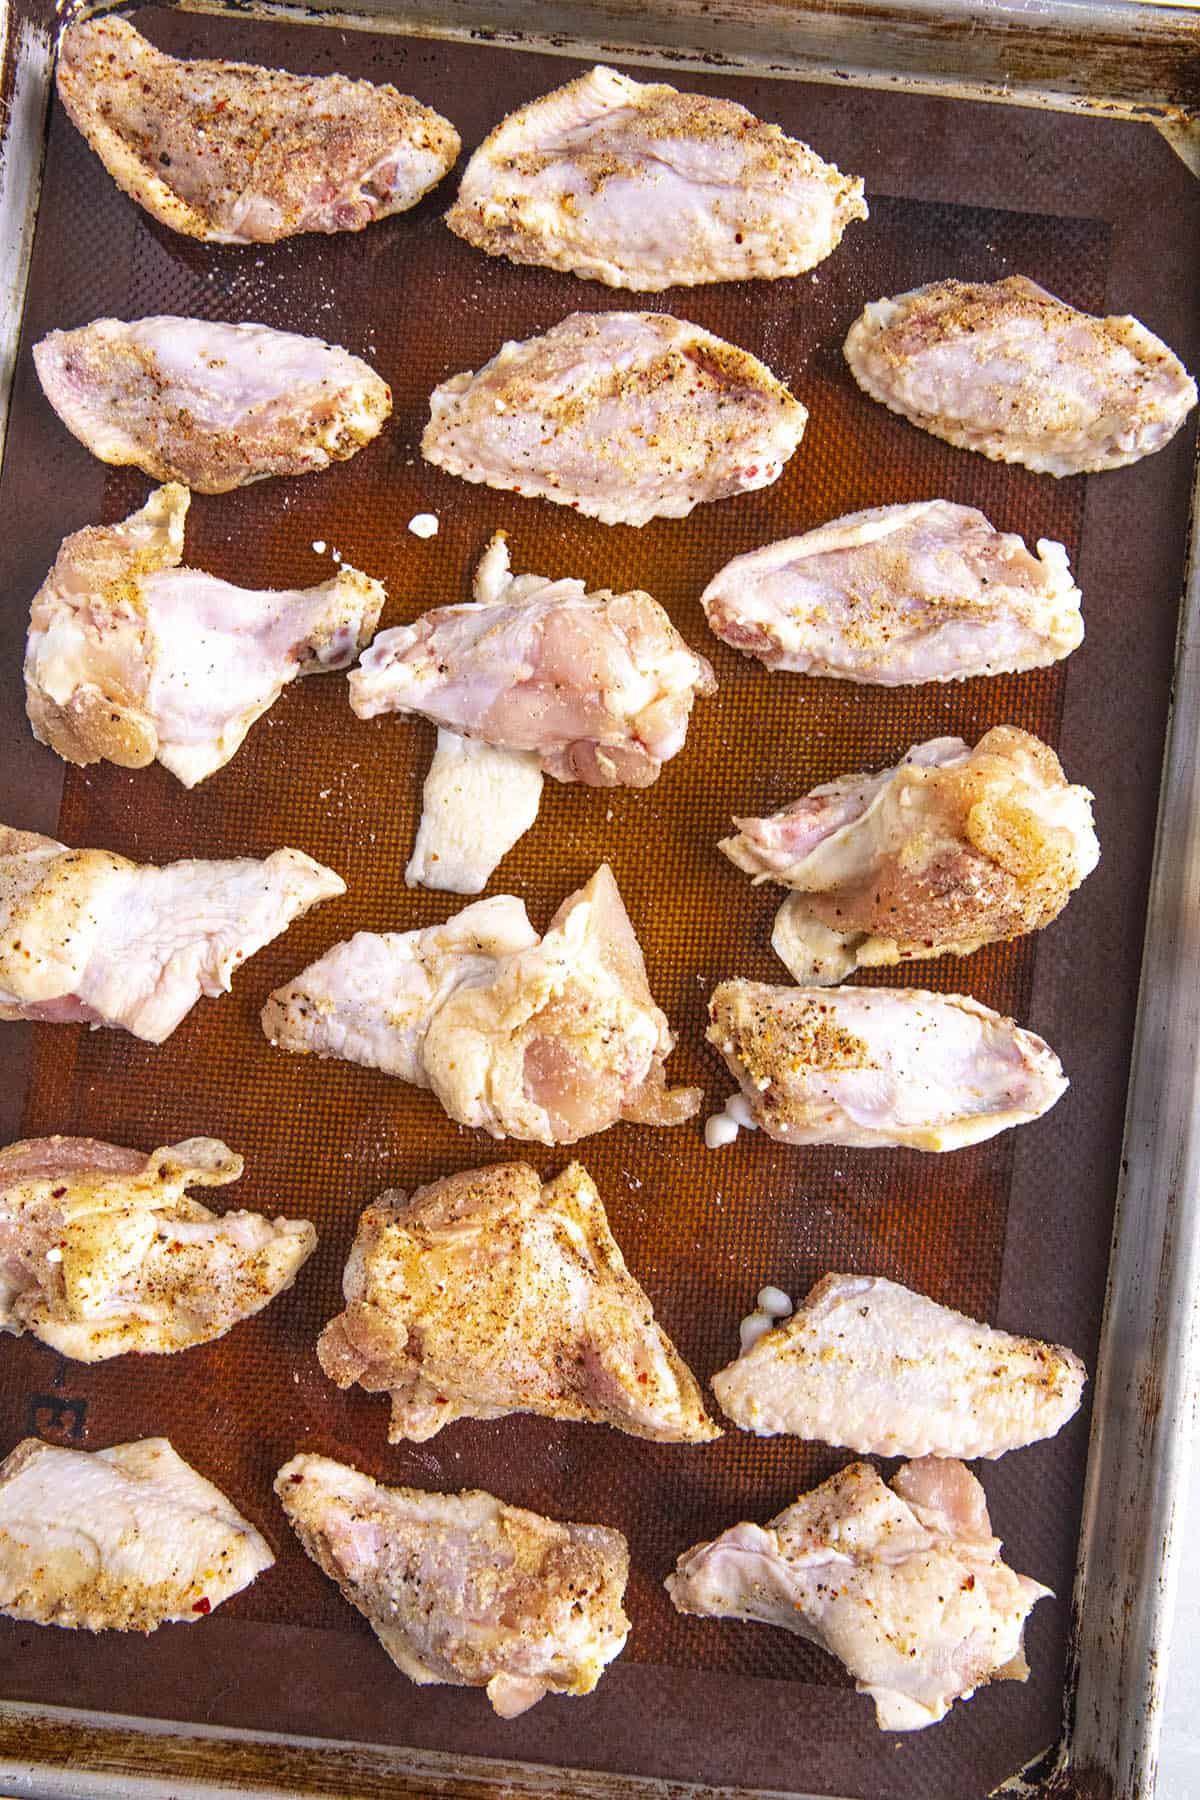 Seasoned Chicken wings ready for the oven